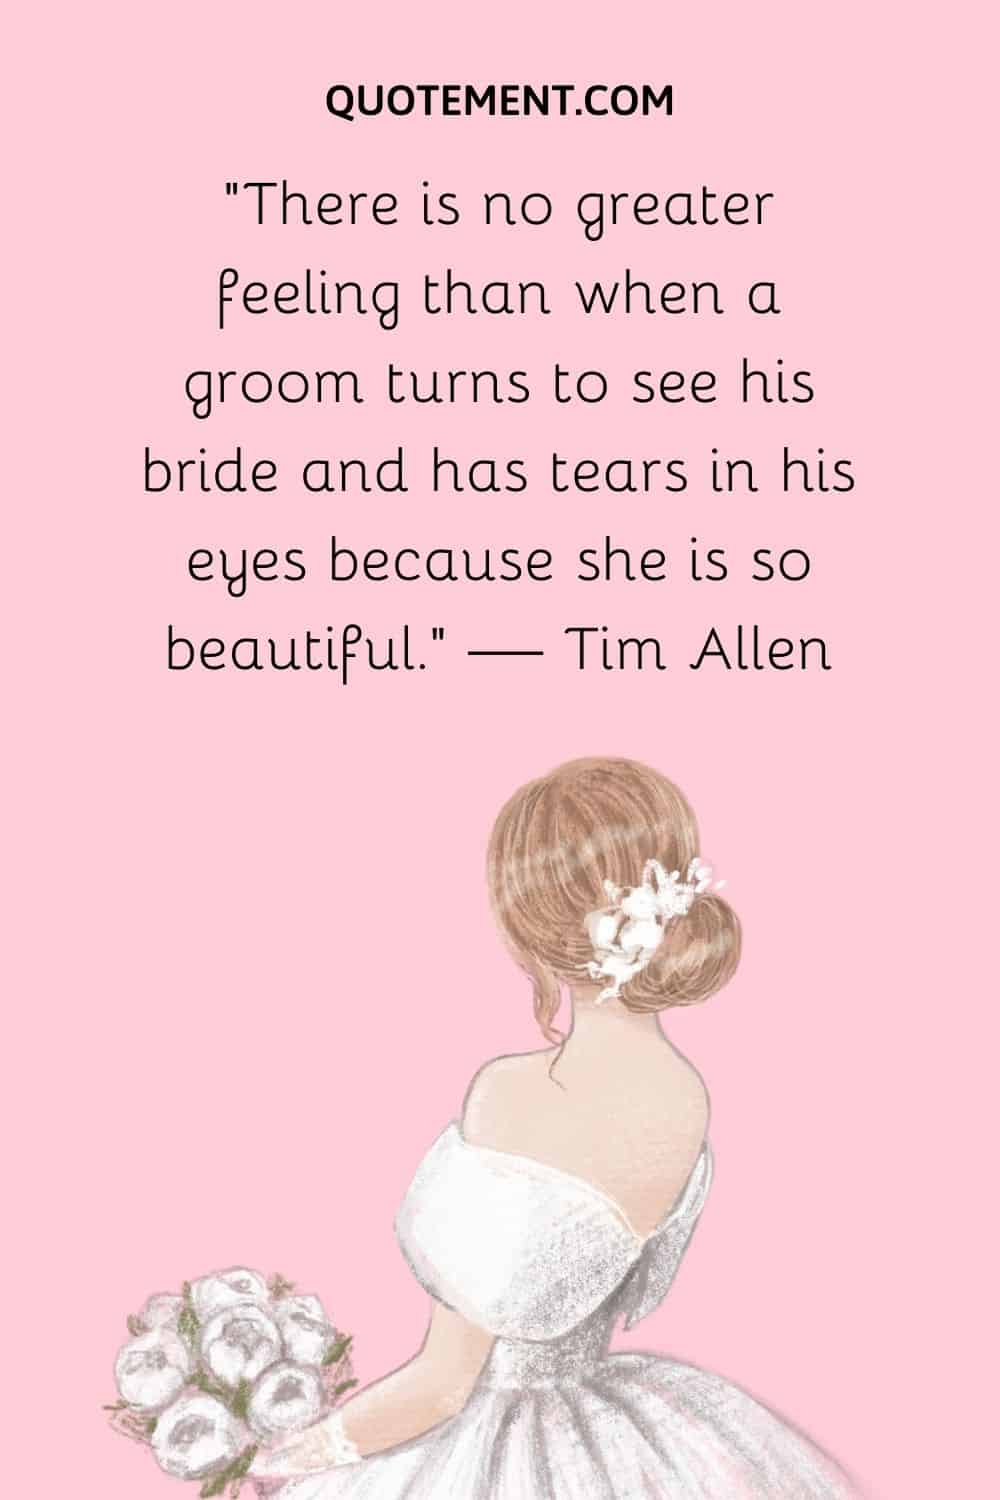 There is no greater feeling than when a groom turns to see his bride and has tears in his eyes because she is so beautiful. — Tim Allen